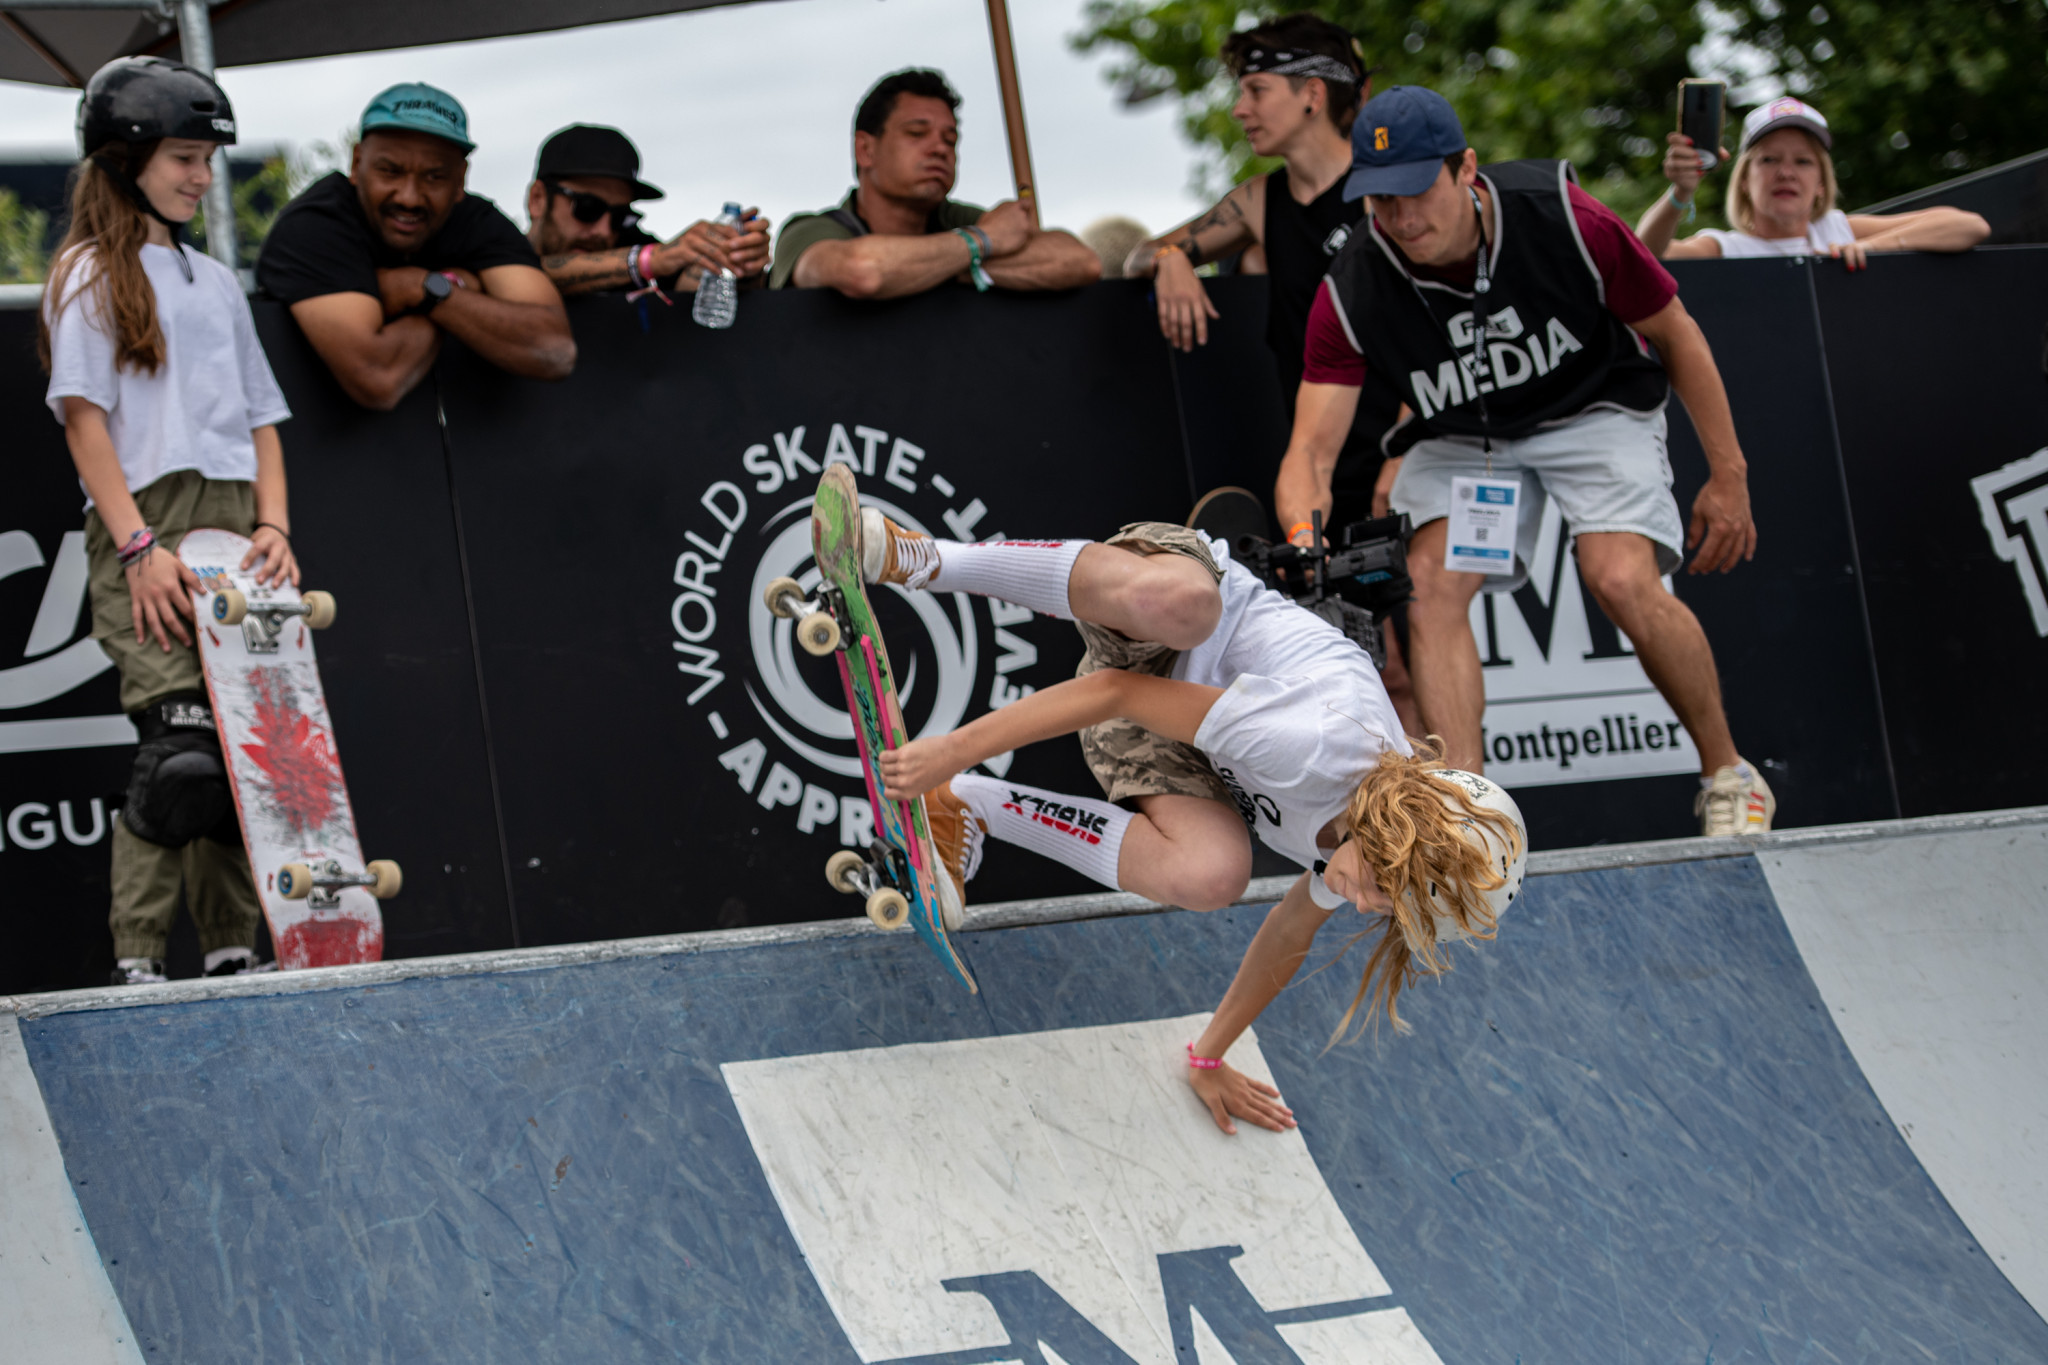 Spanish prodigy Daniela Terol Mendez narrowly missed out on first place to the pre-competition favourite Hym ©Hurricane - FISE